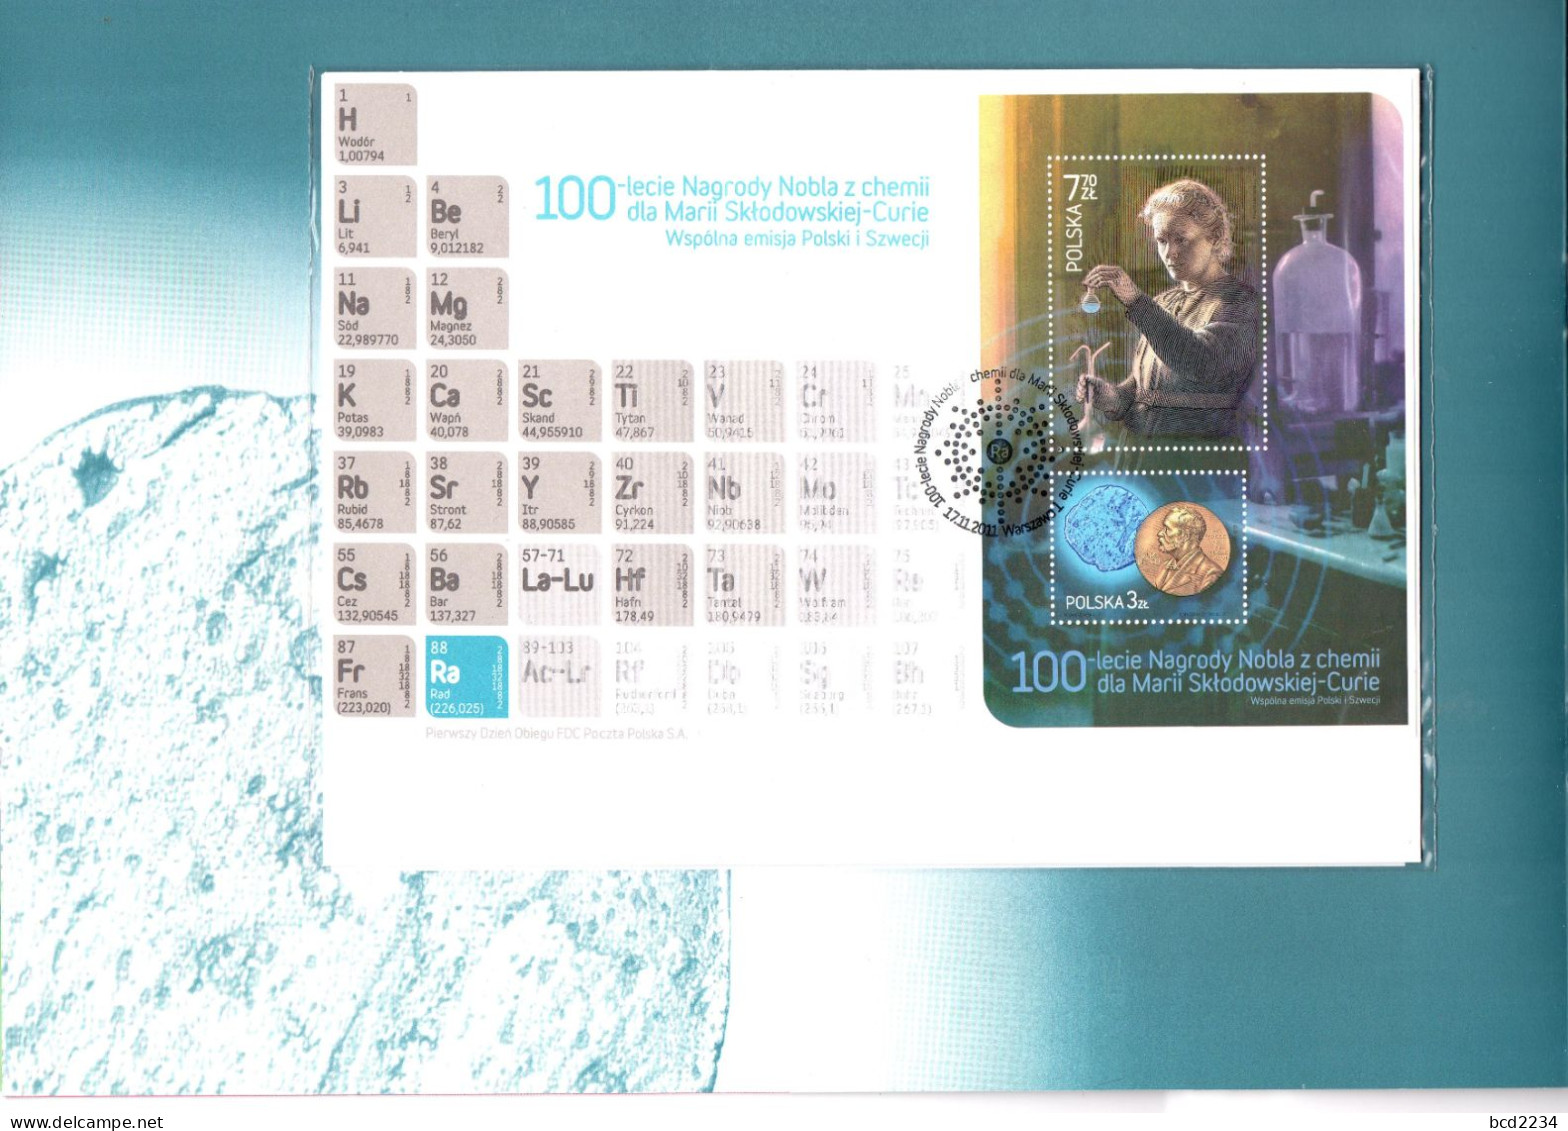 POLAND 2011 LIMITED EDITION: RARE 100TH ANNIVERSARY MARIE CURIE NOBEL PRIZE CHEMISTRY FOLDER FDC MS PL SWEDEN - Blocks & Sheetlets